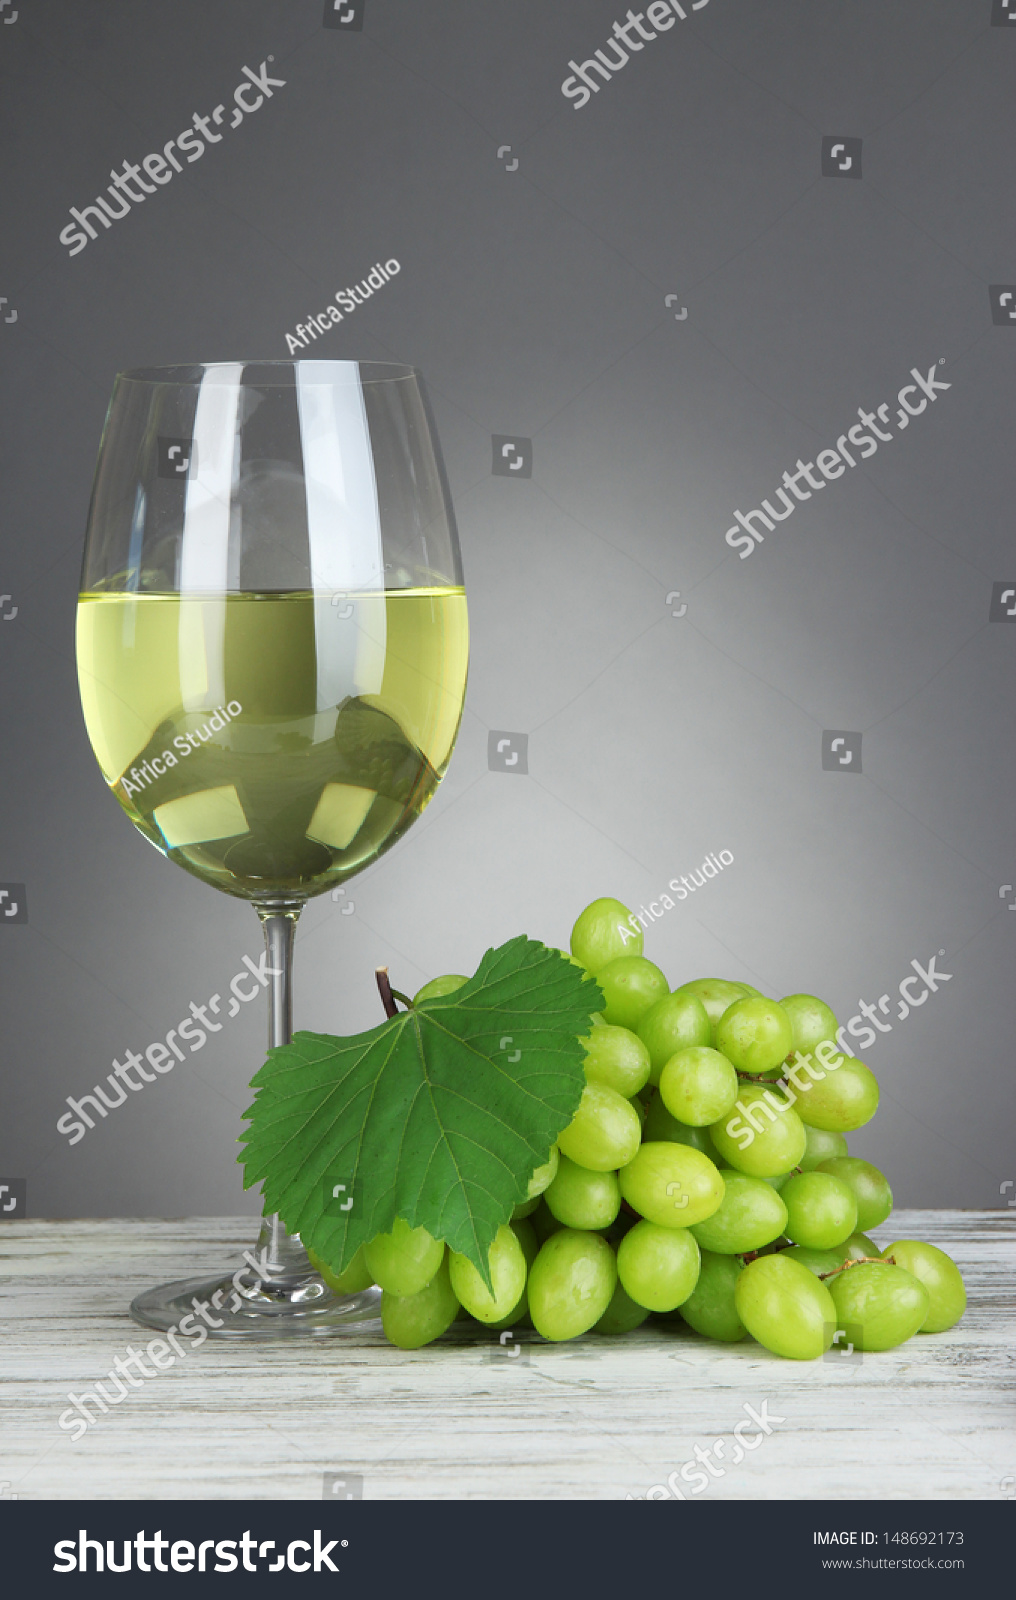 Ripe delicious grapes with glass of wine on table on gray background #148692173